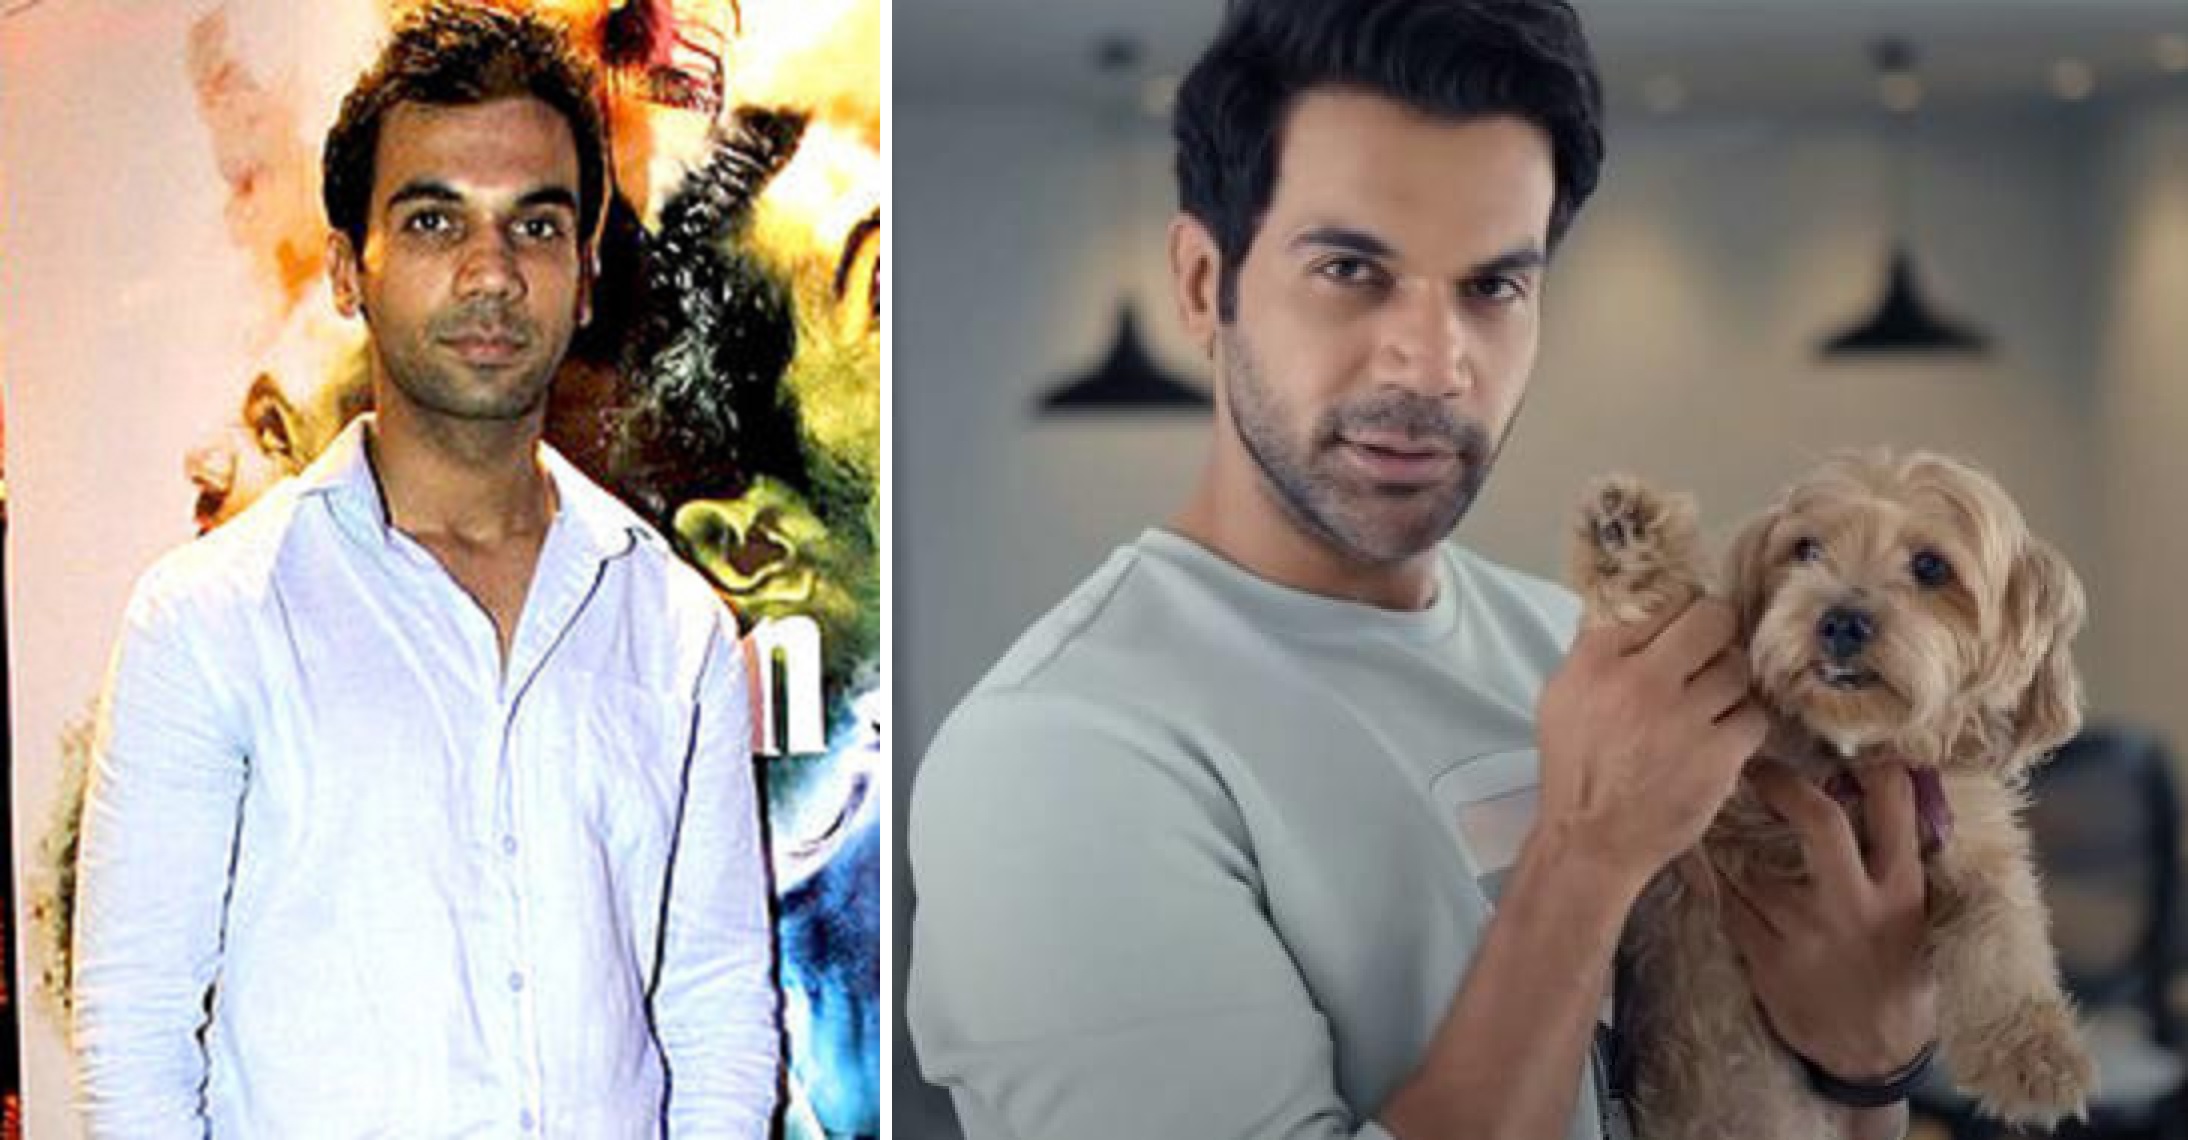 Rajkumar Rao Shows His Stunning New Home, Remembers Living With 16 People in Gurgaon